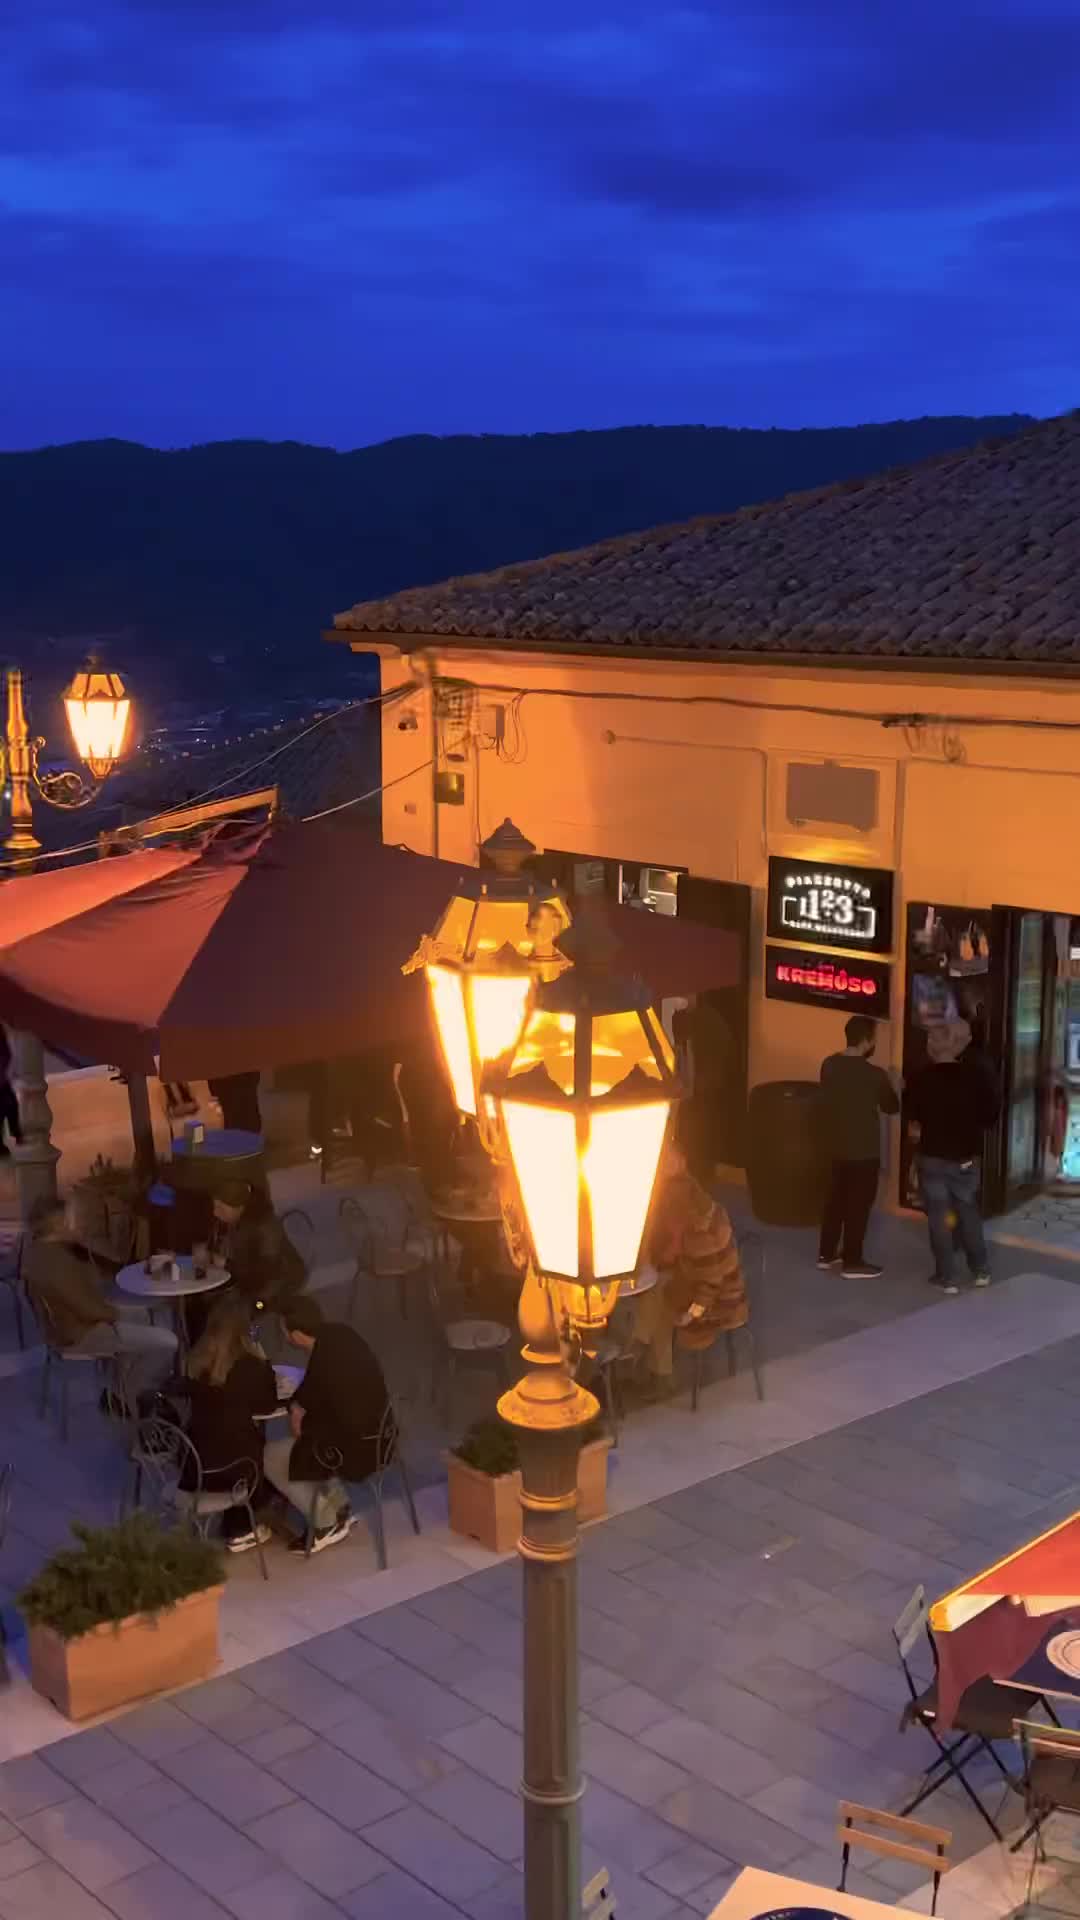 Discover the Beauty of Castellabate, Italy at Dusk